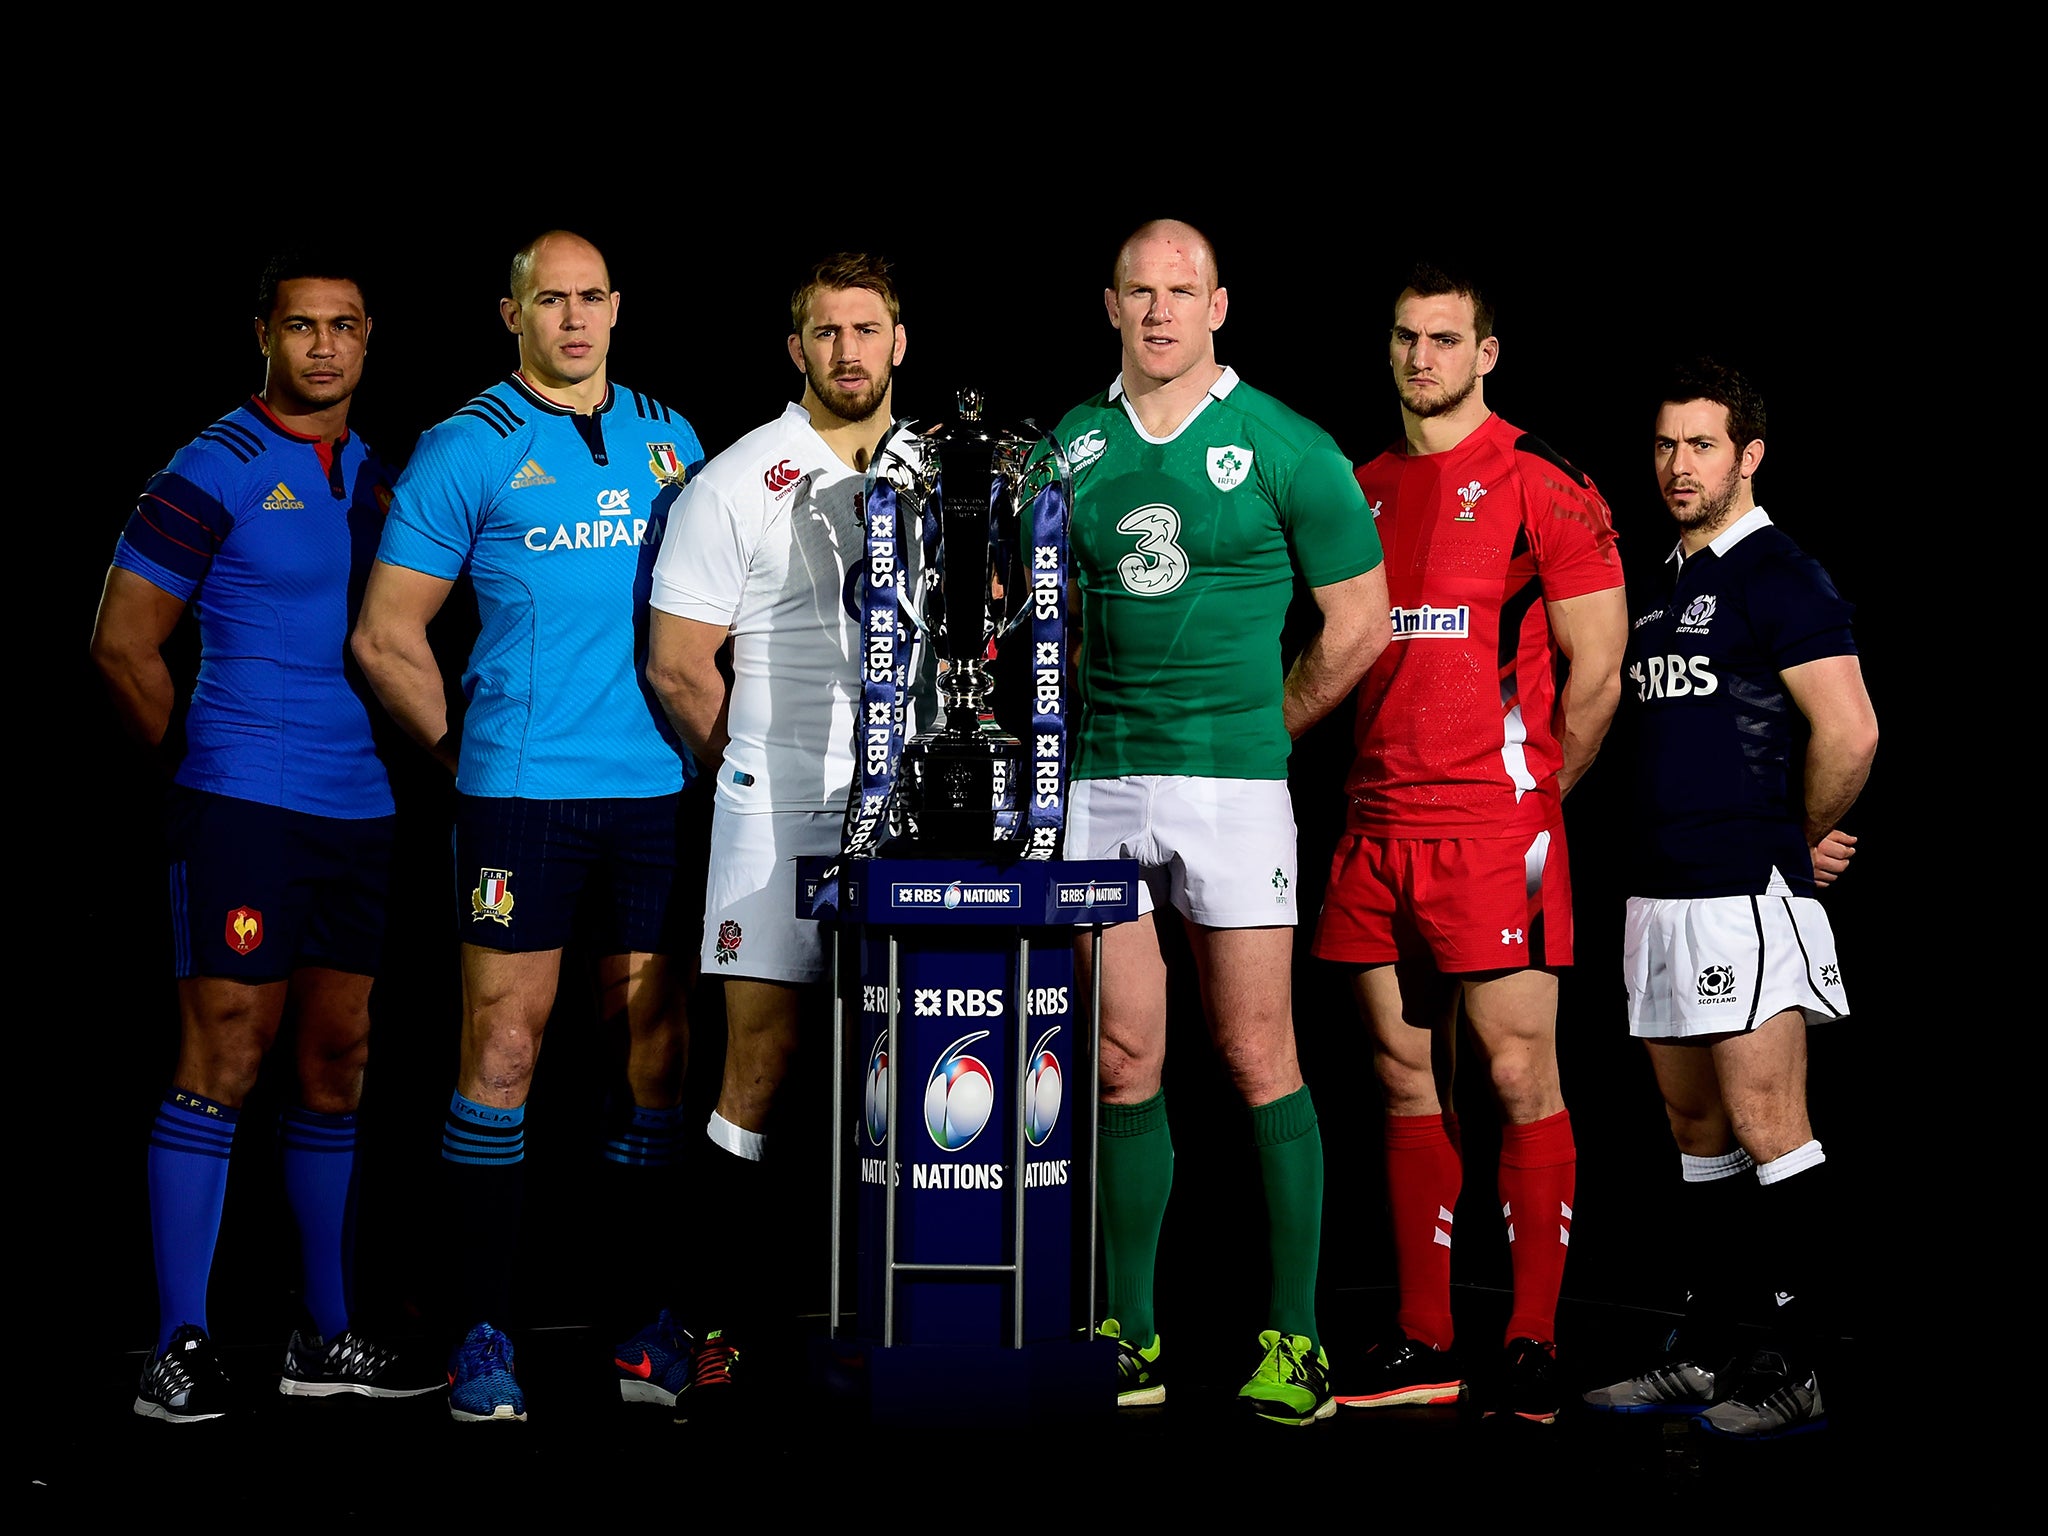 (Left to right) Thierry Dusautoir of France, Sergio Parisse of Italy, Chris Robshaw of England, Paul O'Connell of Ireland, Sam Warburton of Wales and Greig Laidlaw of Scotland pose with the trophy during the launch of the 2015 RBS Six Nations